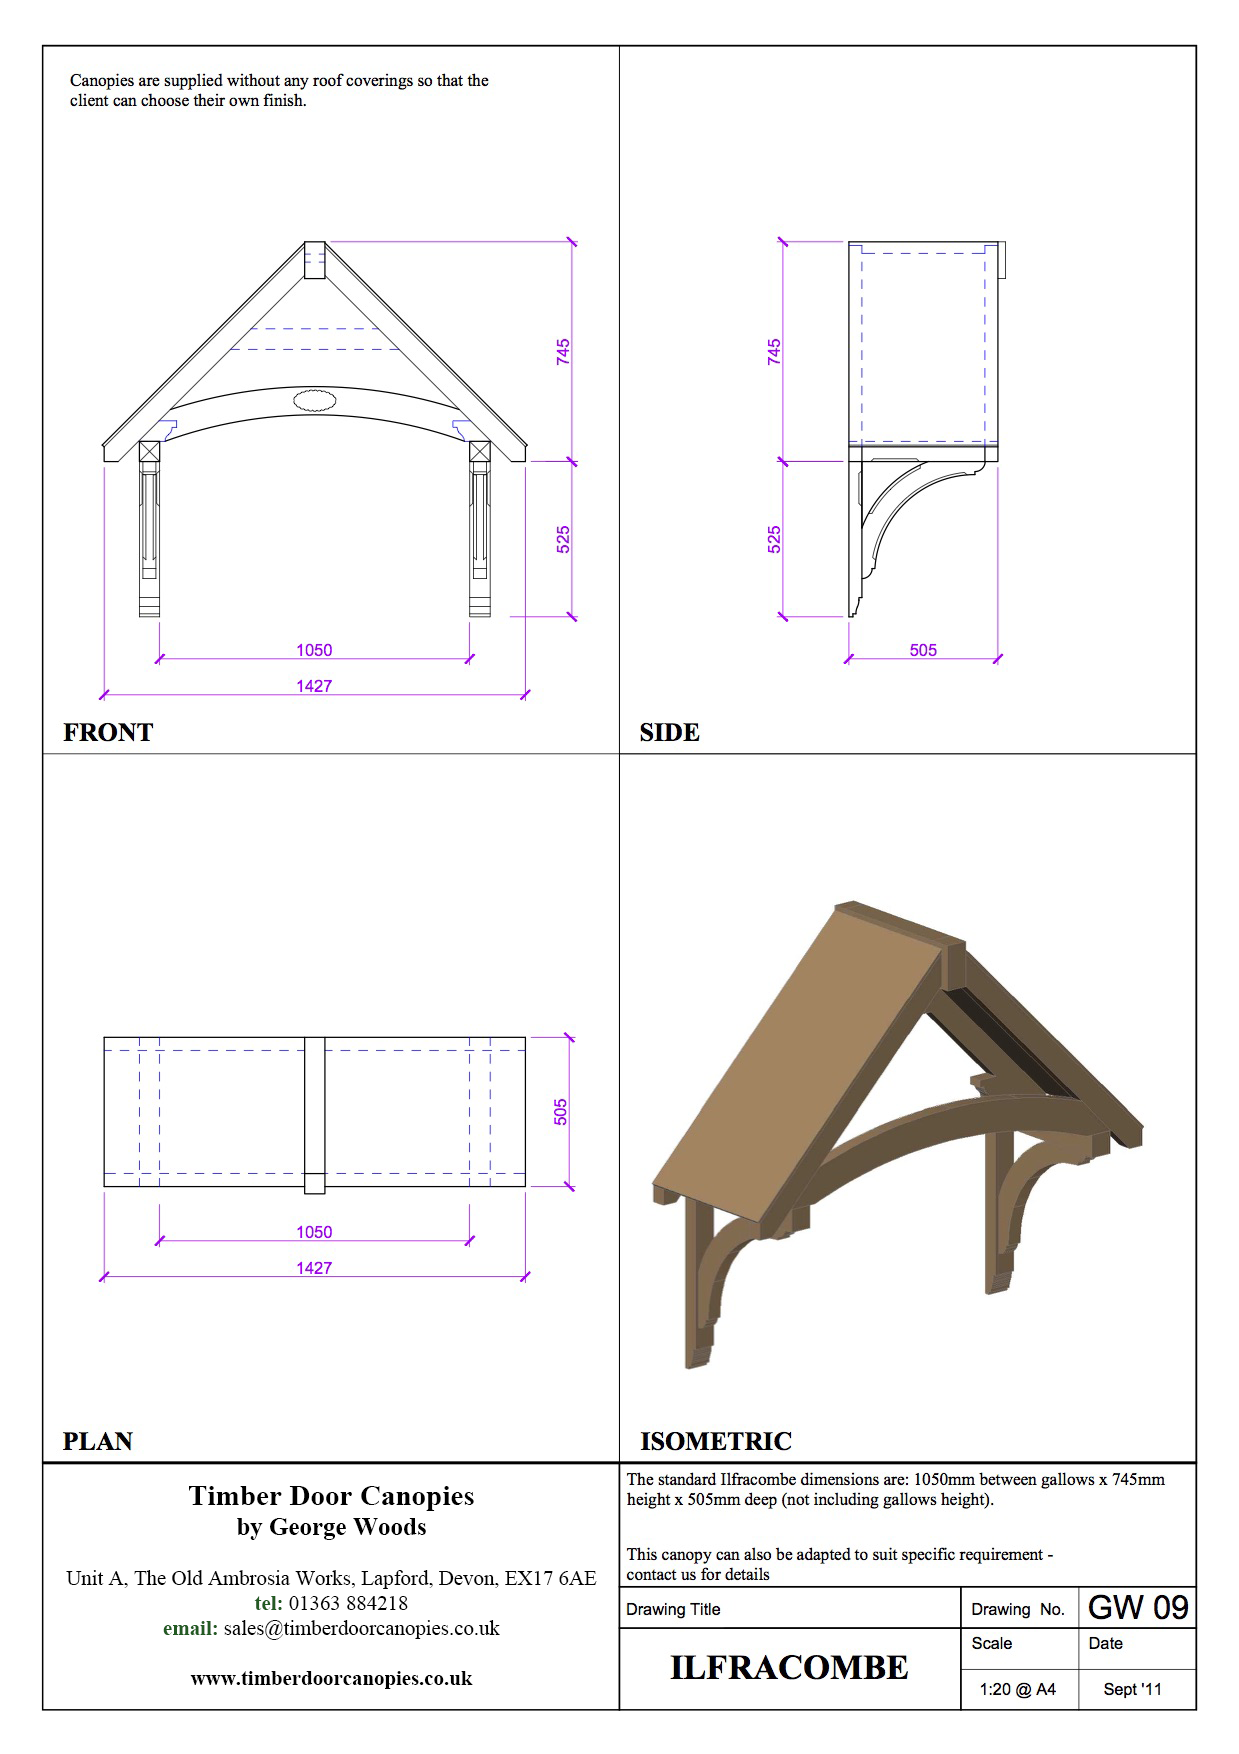 Harcombe canopy CAD drawings